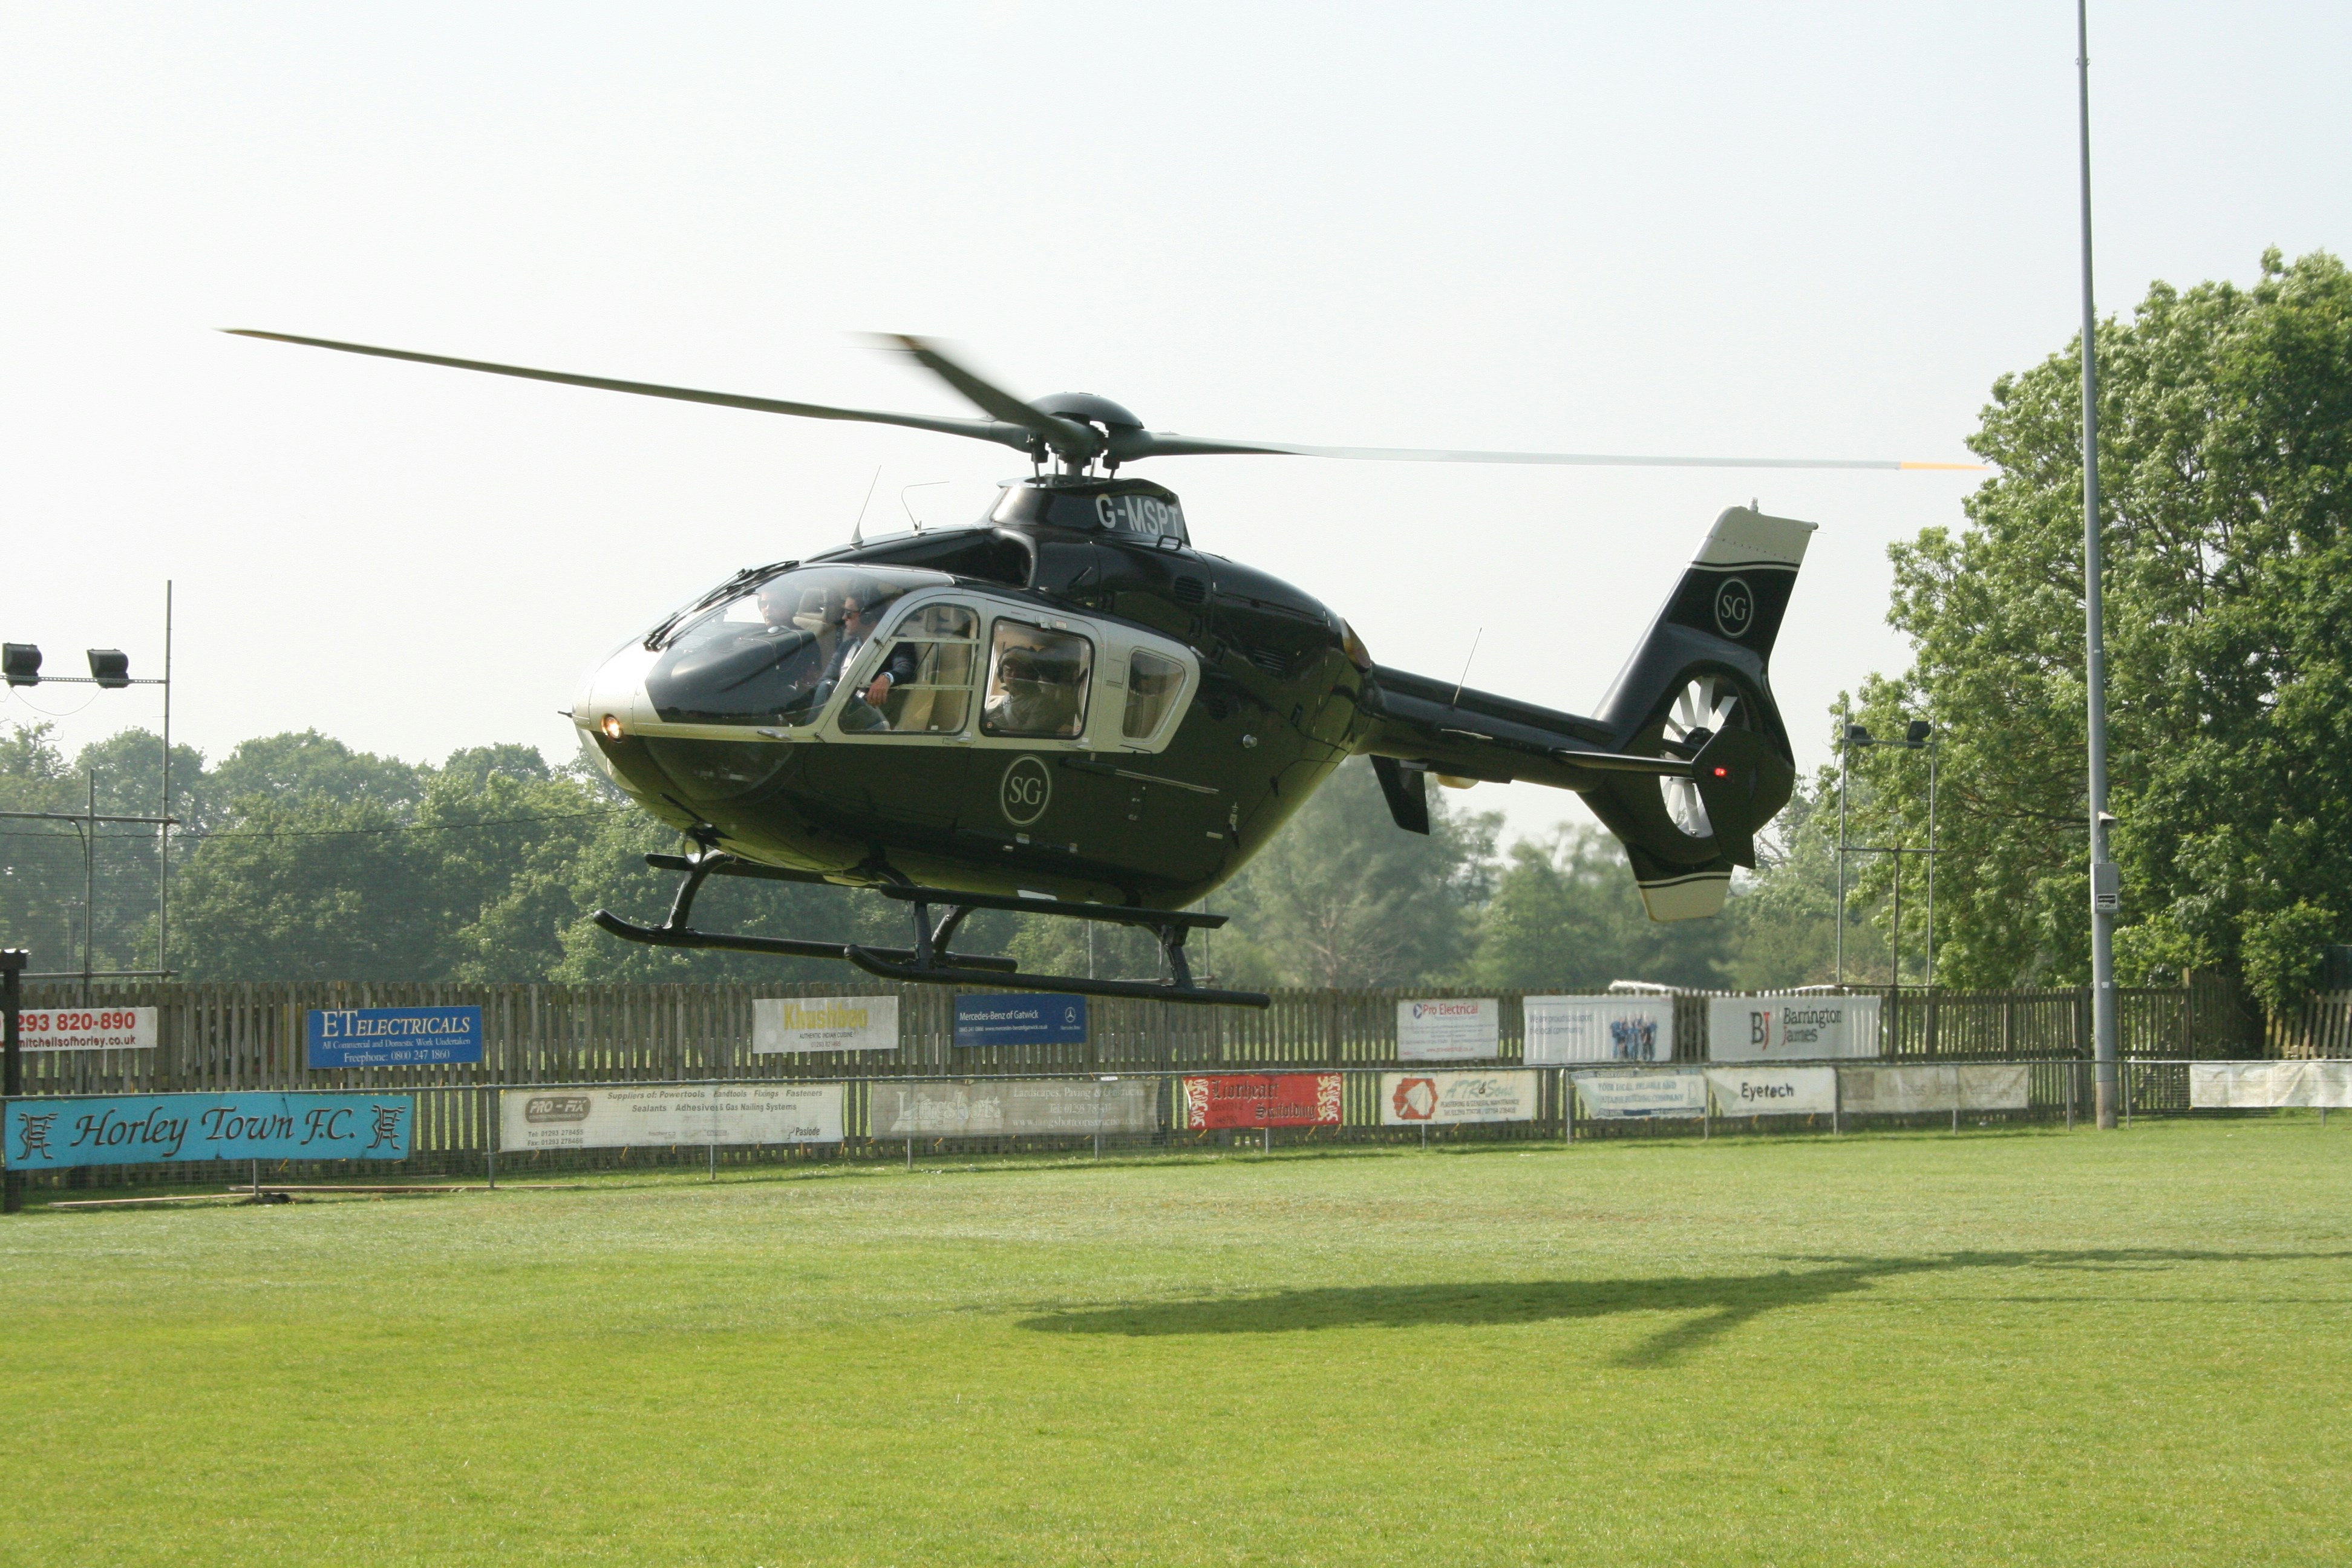 Helicopter landing on the football pitch at Horley Town Football Club